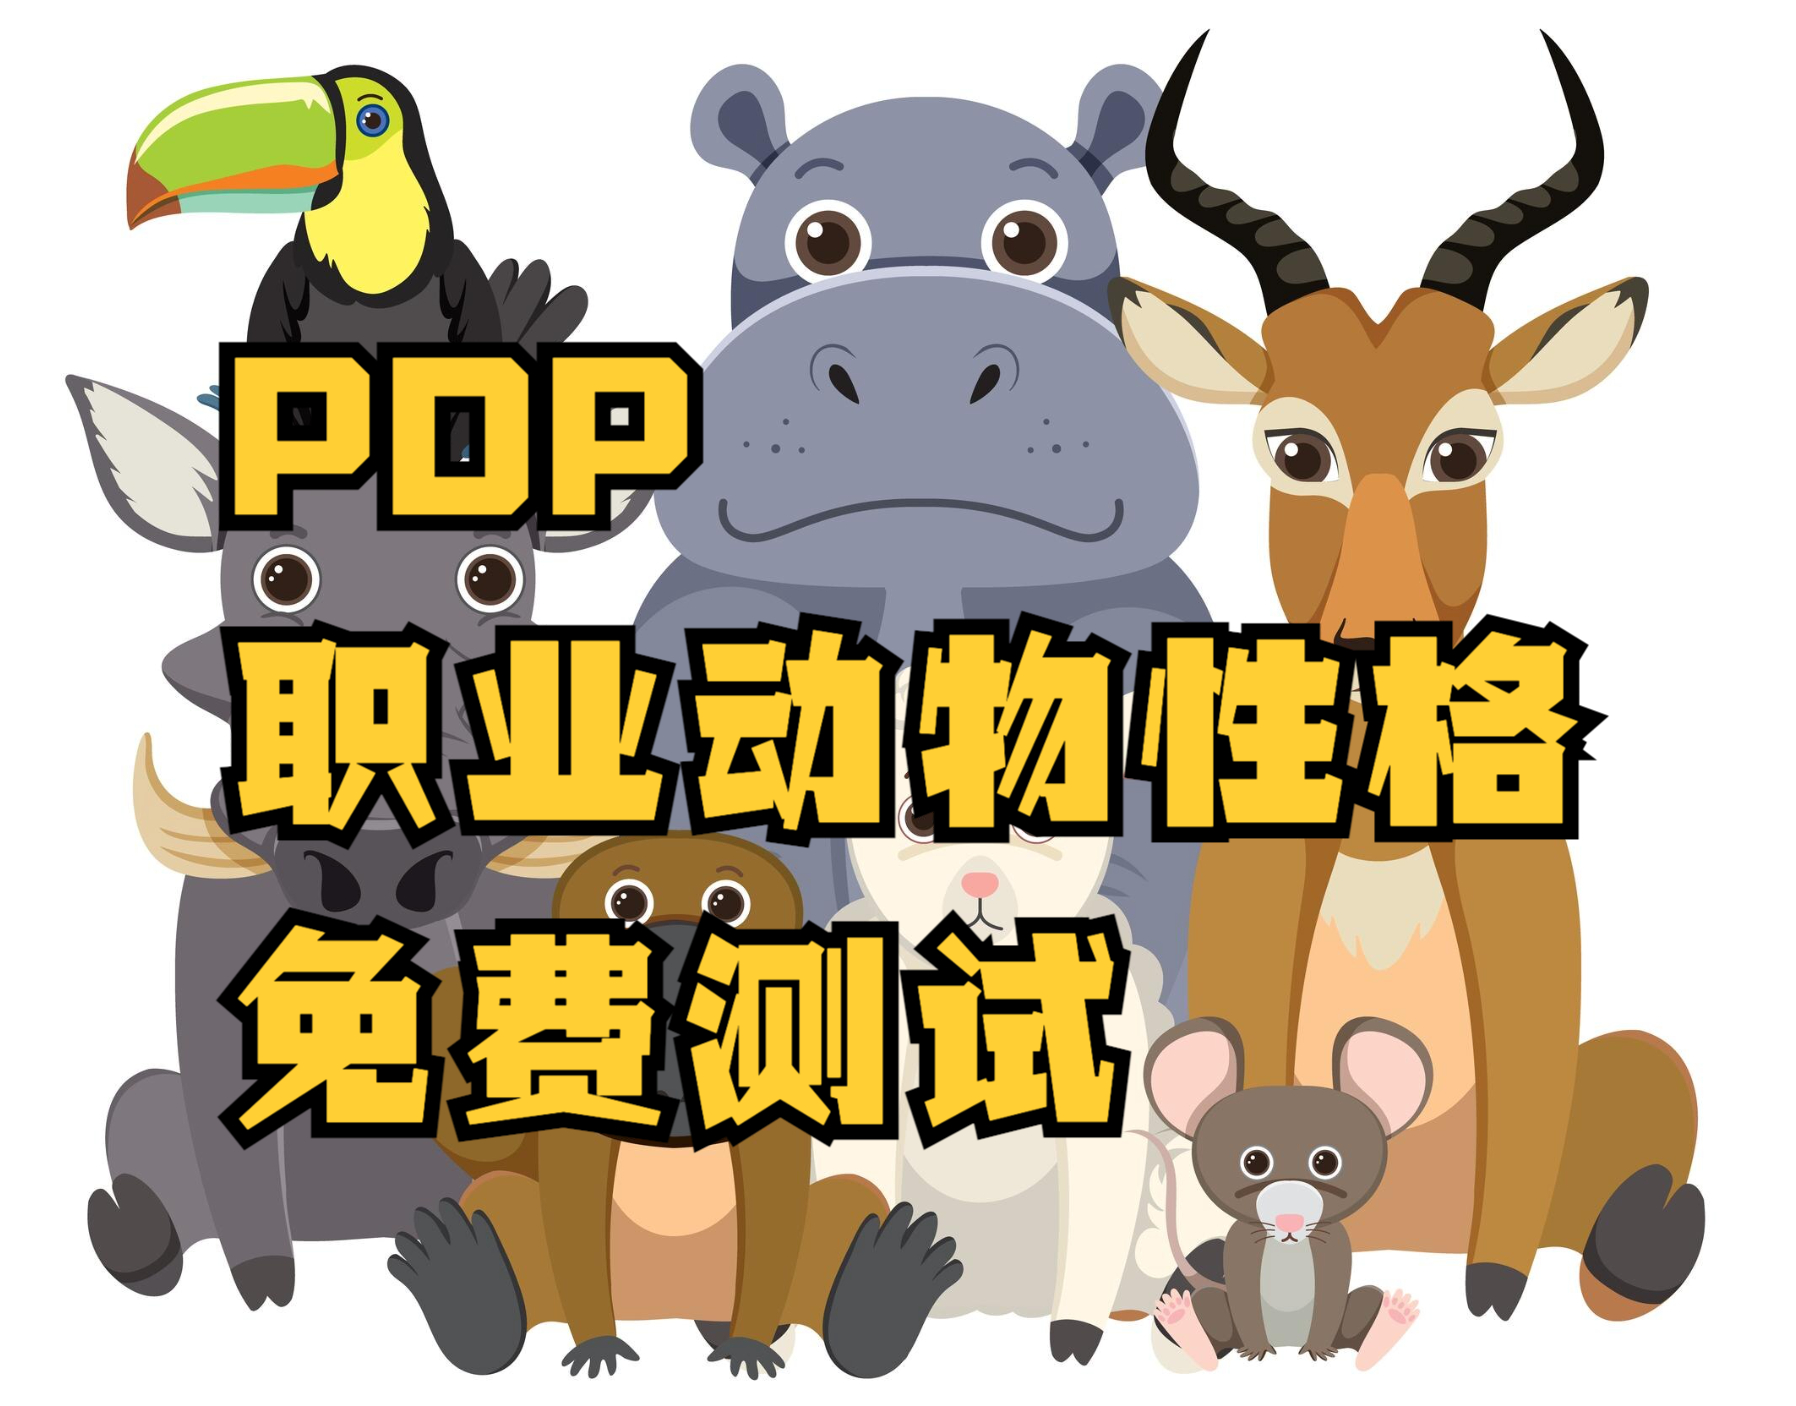 What kind of animal is your personality? Free PDP personality test tells you the answer!